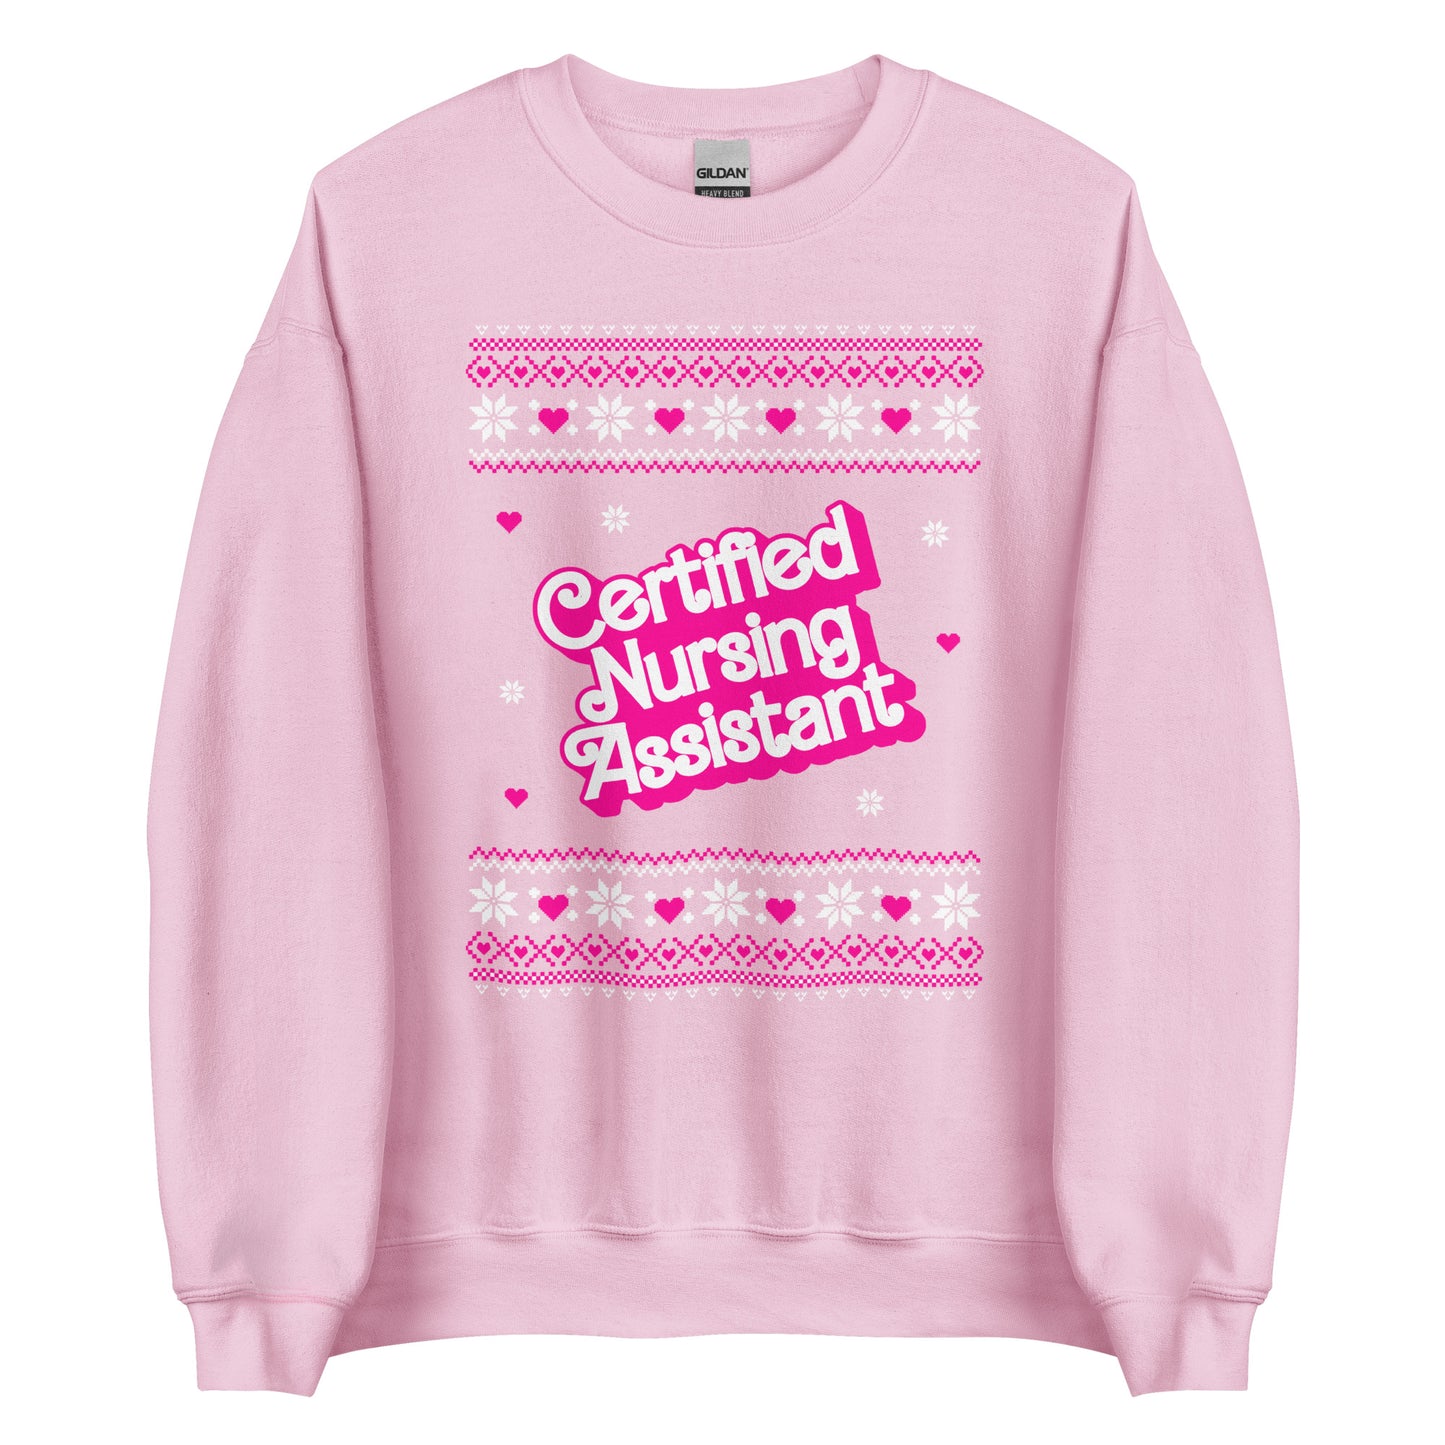 Barbie Certified Nursing Assistant Ugly Christmas Sweater